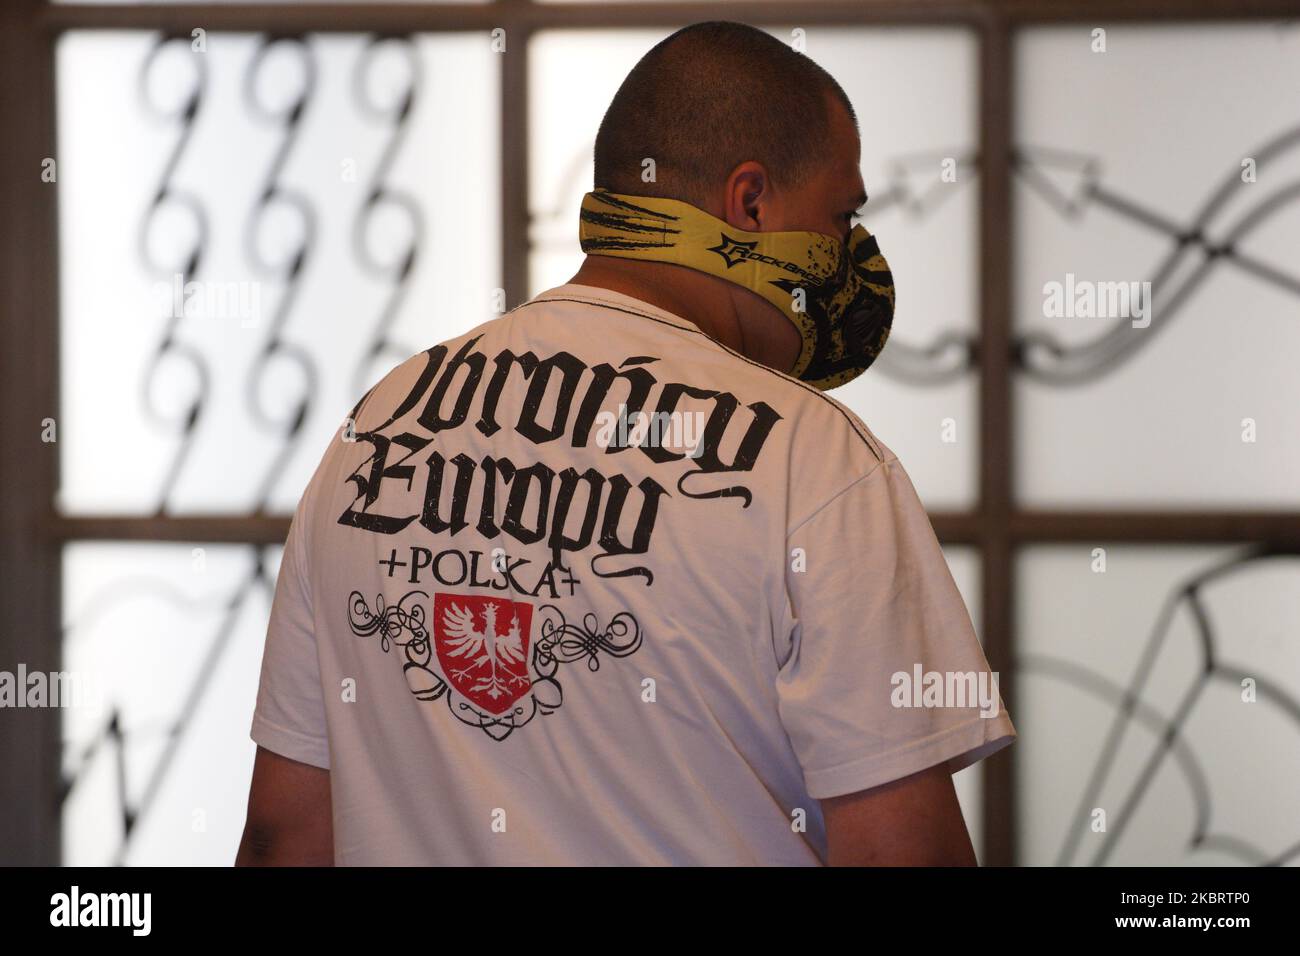 A man with a t-shirt with the words "Defender of Europe Poland" is seen at  a voting station on June 28, 2020 in Warsaw, Poland. (Photo by Jaap  Arriens/NurPhoto Stock Photo -